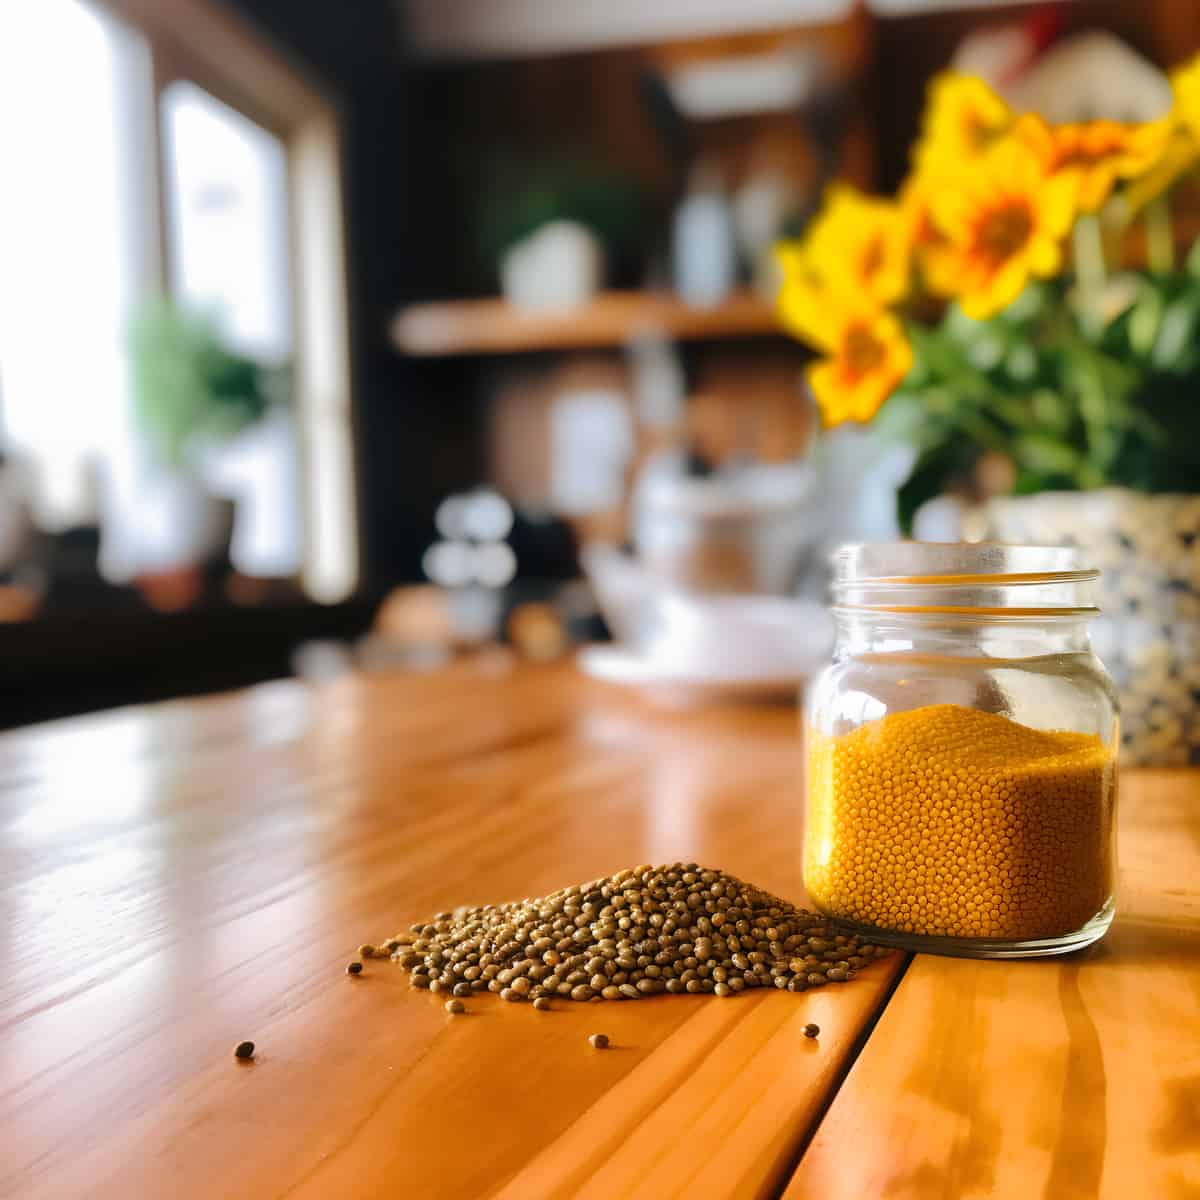 Mustard Seed on a kitchen counter